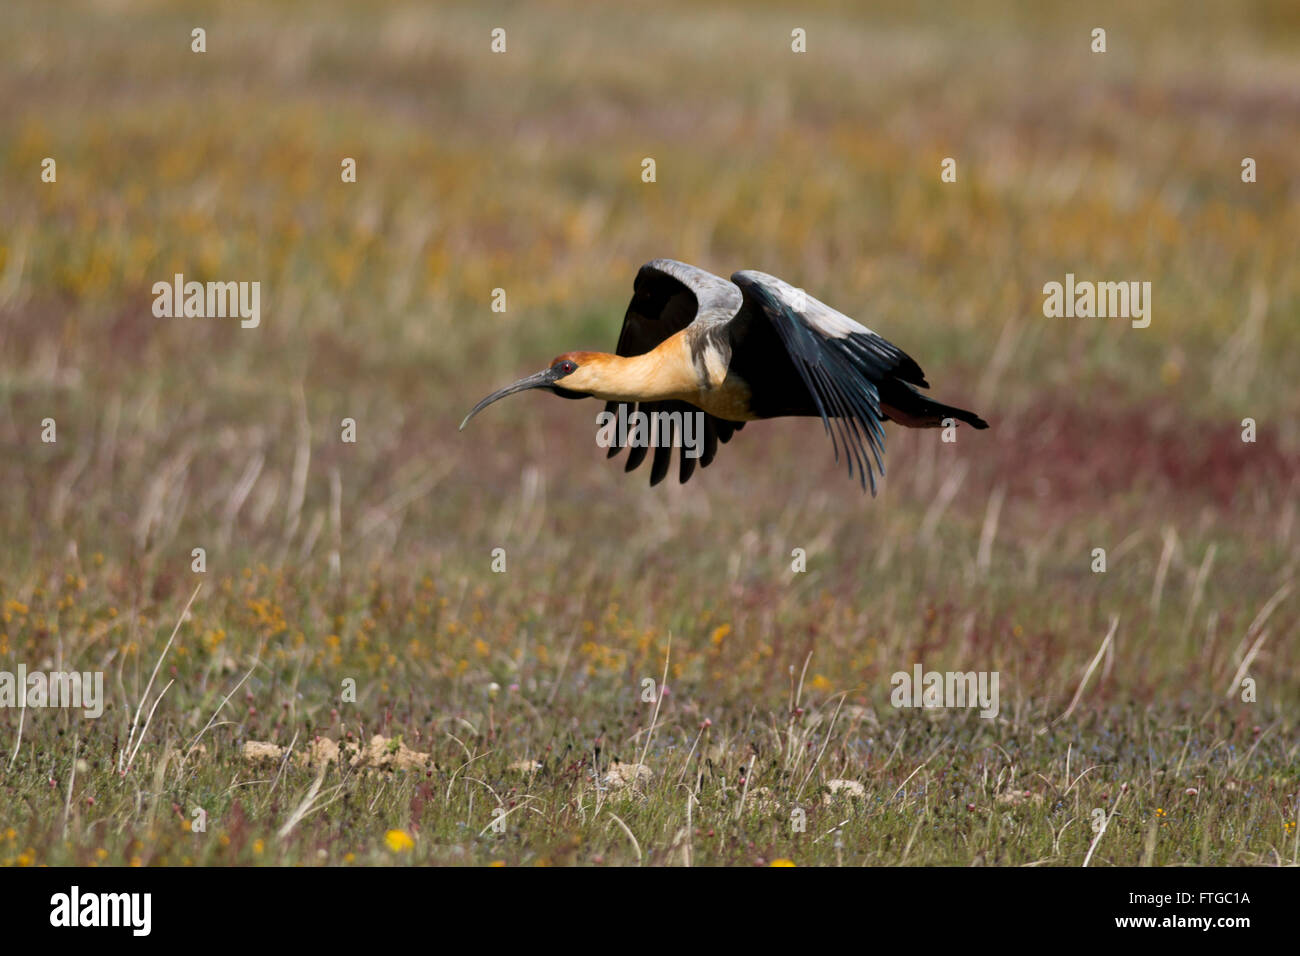 Black-faced ibis flying over meadows in Patagonia. Typical argentinian bird called Bandurria Austral Stock Photo